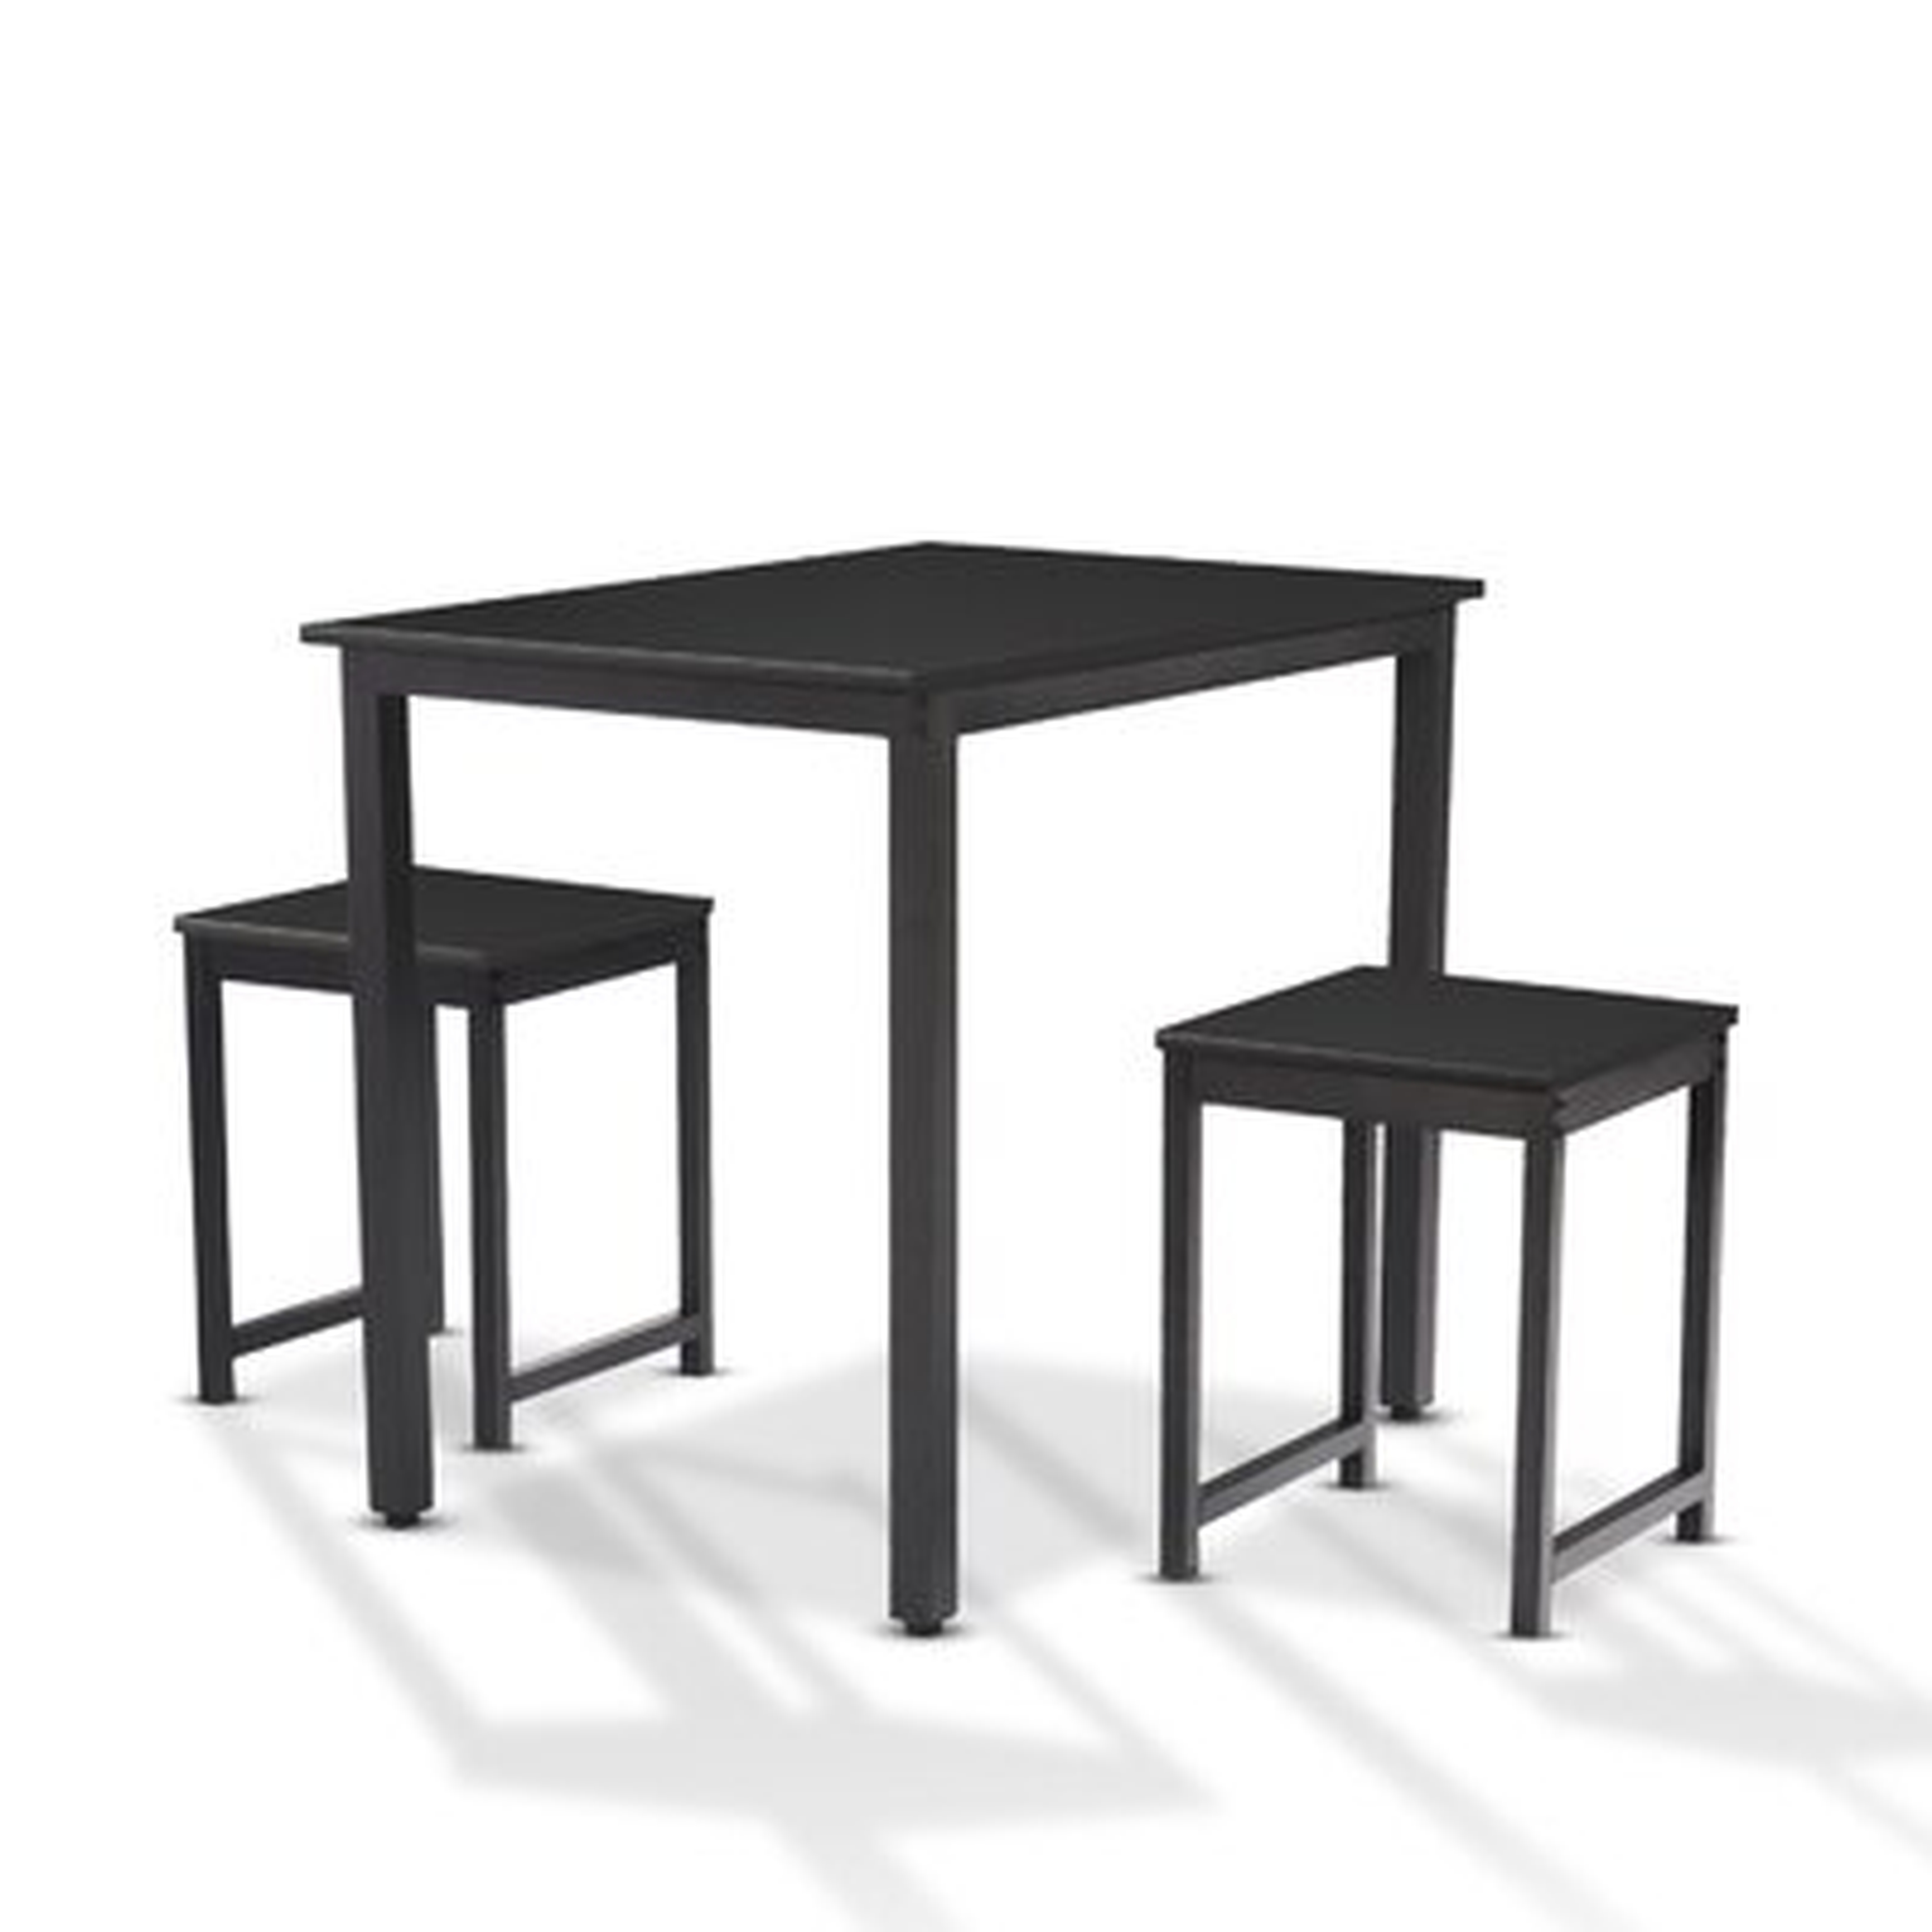 Dining Set,3 Piece Dining Set,Small Kitchen Table Set For 2 With Table And 2 Chairs,Two Person Dining Set,Pub Dining Table Set Perfect For Kitchen, Breakfast Nook, Bar, Living Room,Kitchen Furniture - Wayfair